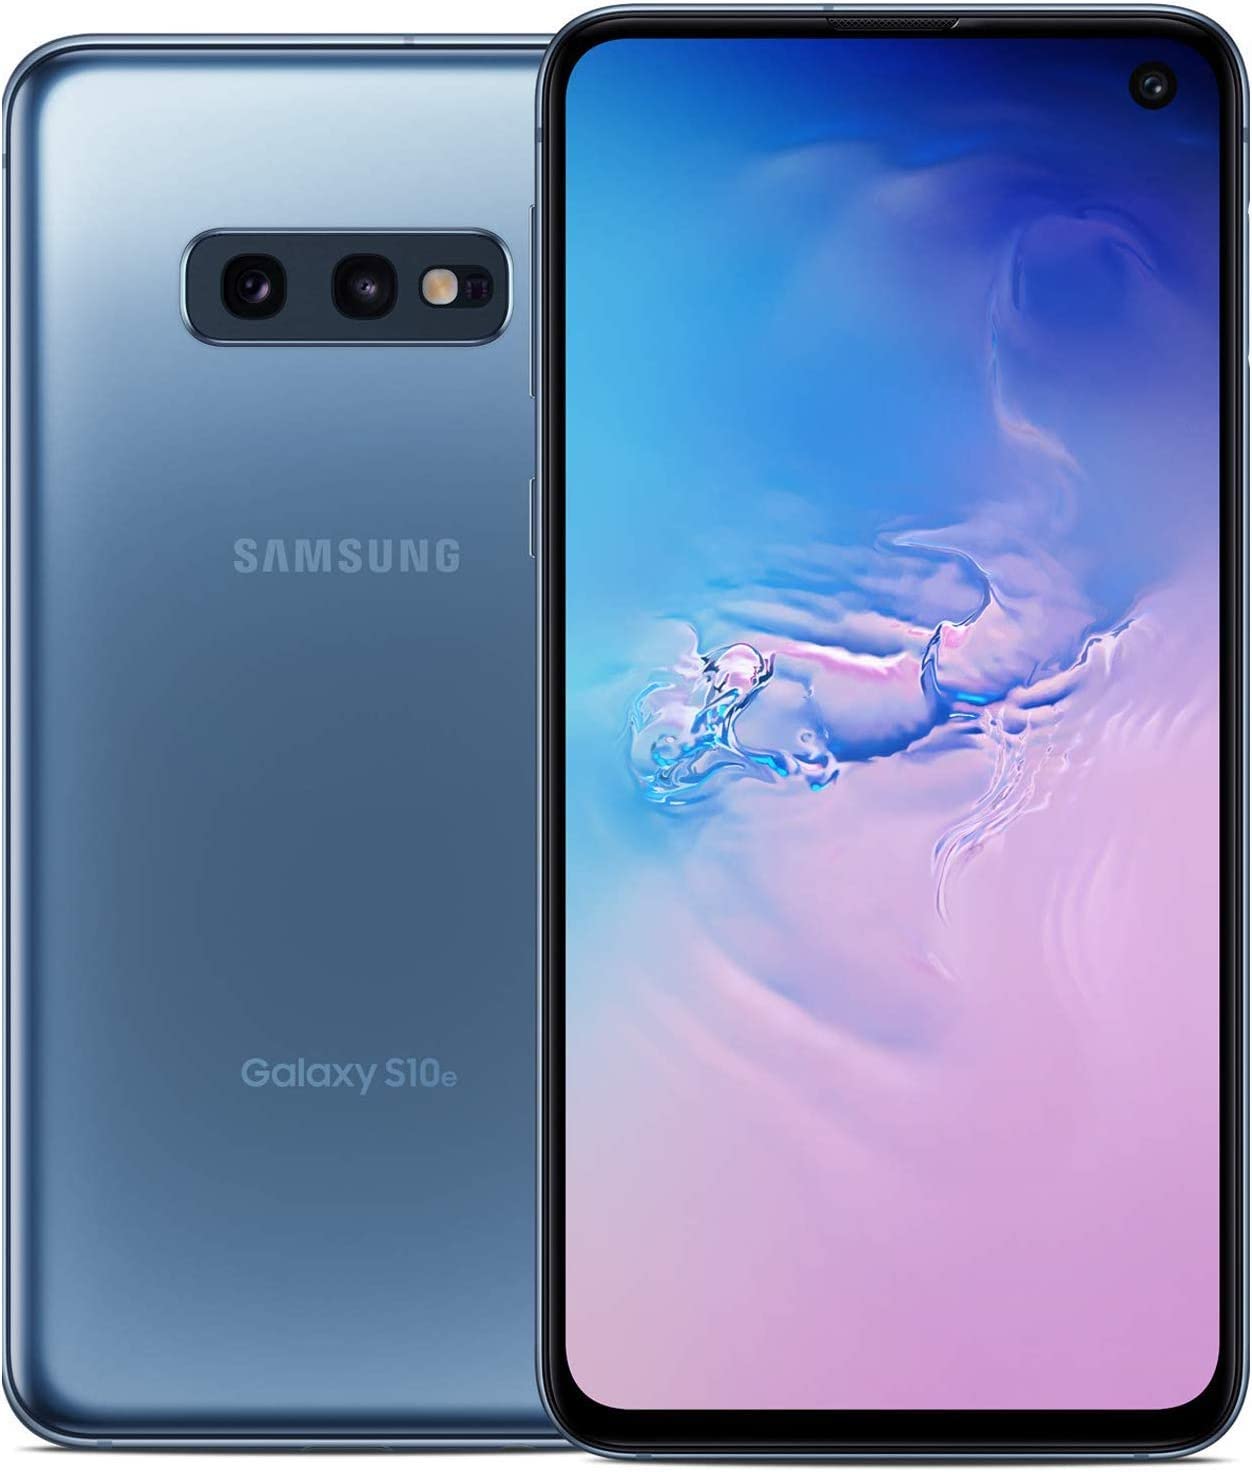 Samsung Galaxy S10e Prism Blue 128GB SM-G970U New Case, Glass Screen Protector & Shipping (As New)